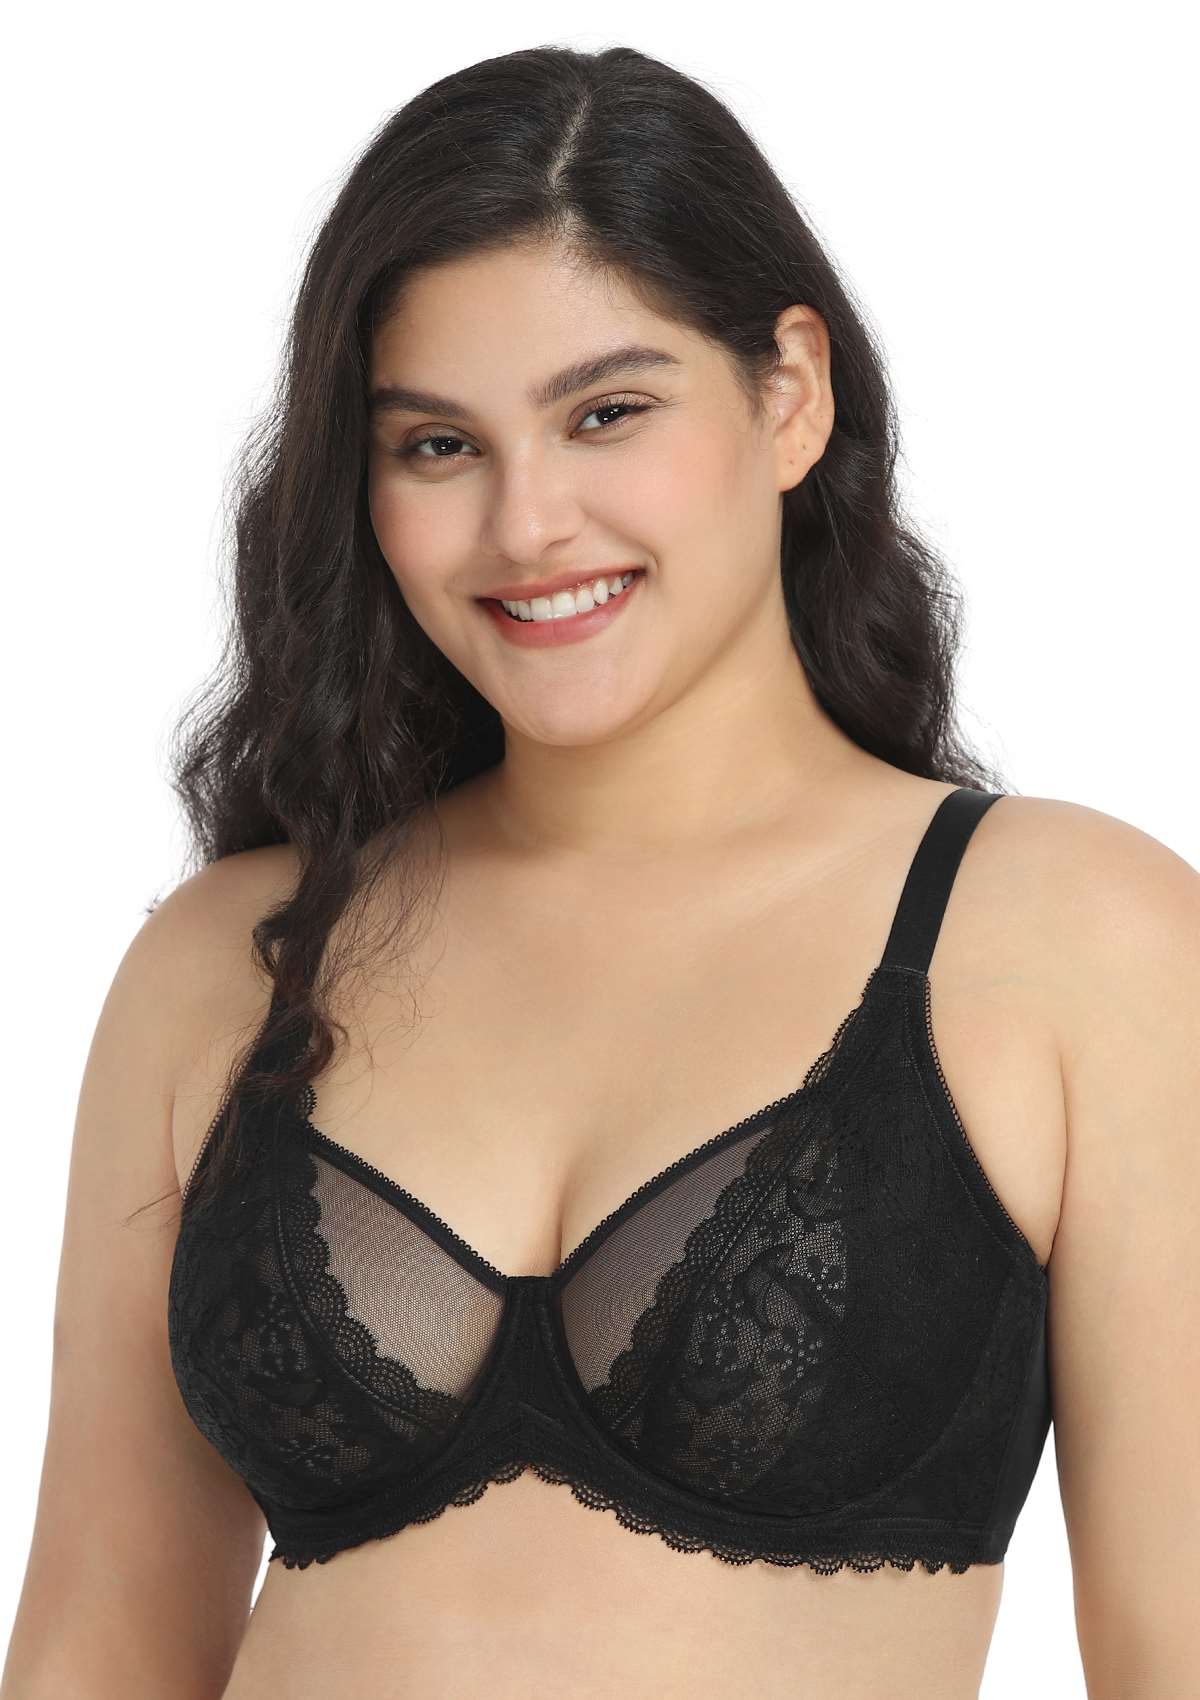 HSIA Anemone Big Bra: Best Bra For Lift And Support, Floral Bra - Black / 38 / D